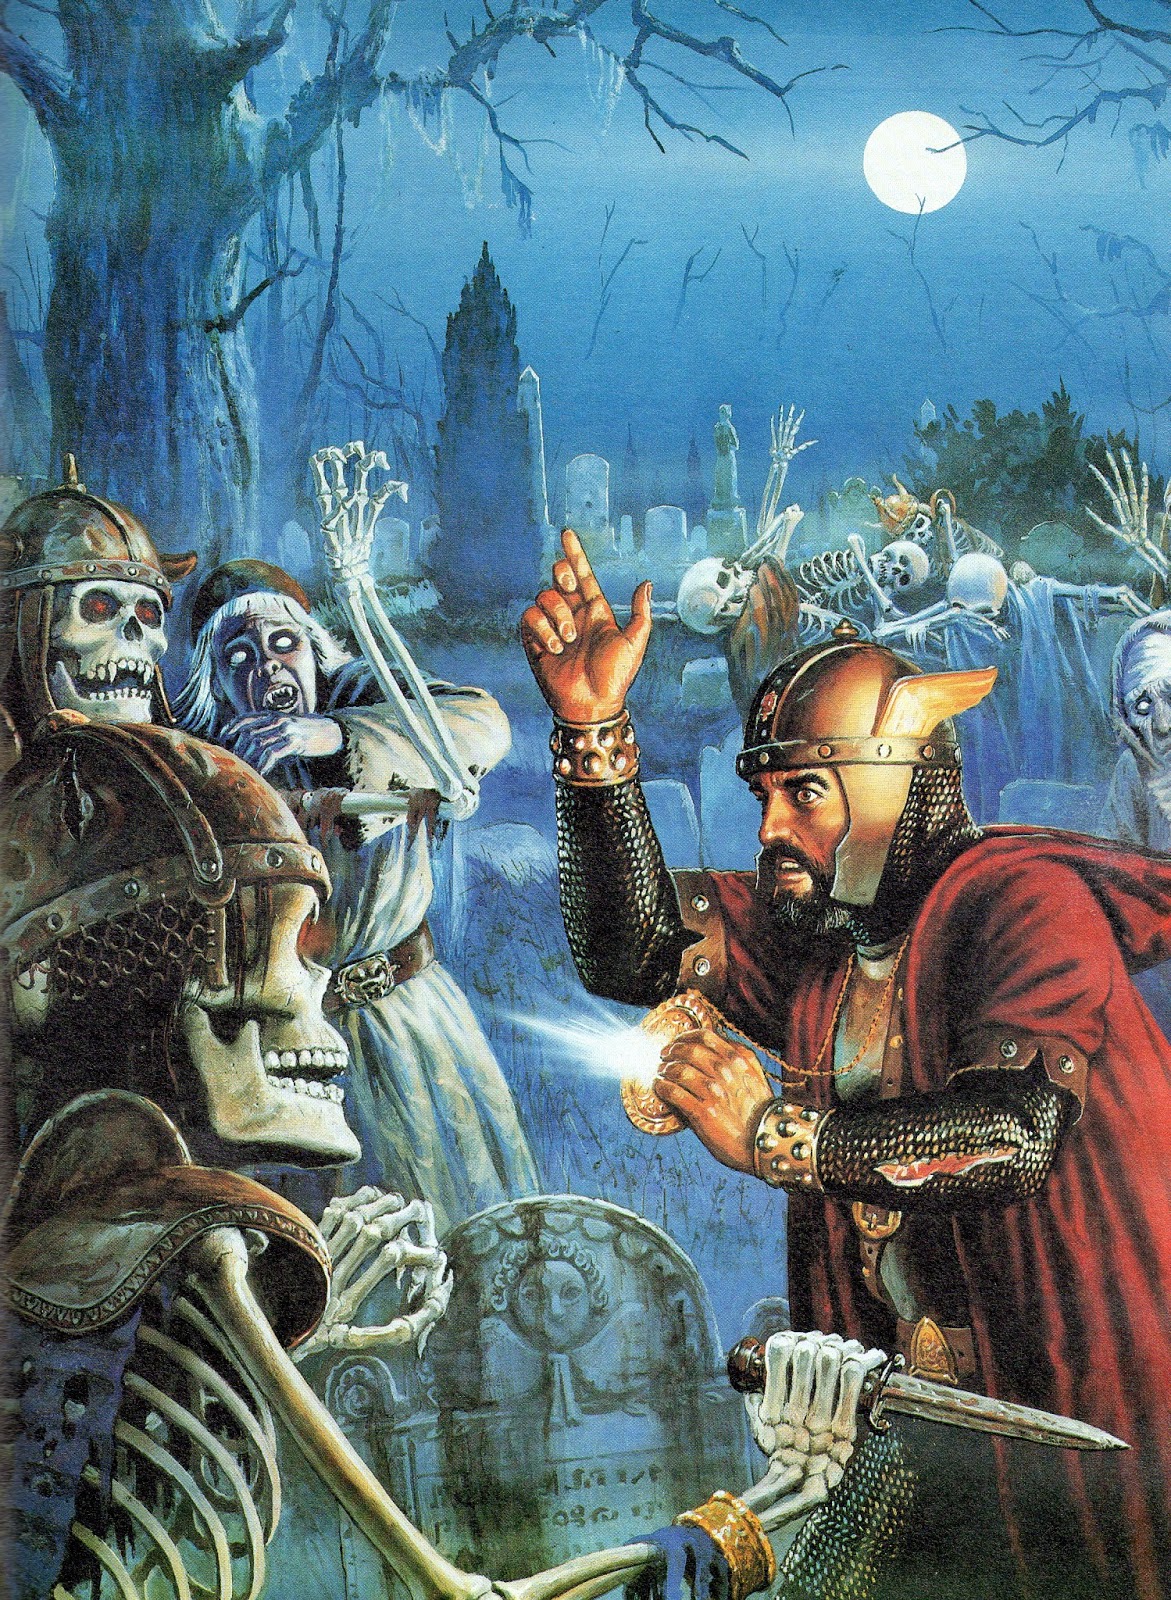 original+colour+art-Dungeons-&-Dragons-2nd-Edition-2e-D&D+cleric+surrounded+by+undead+skeletons.jpg